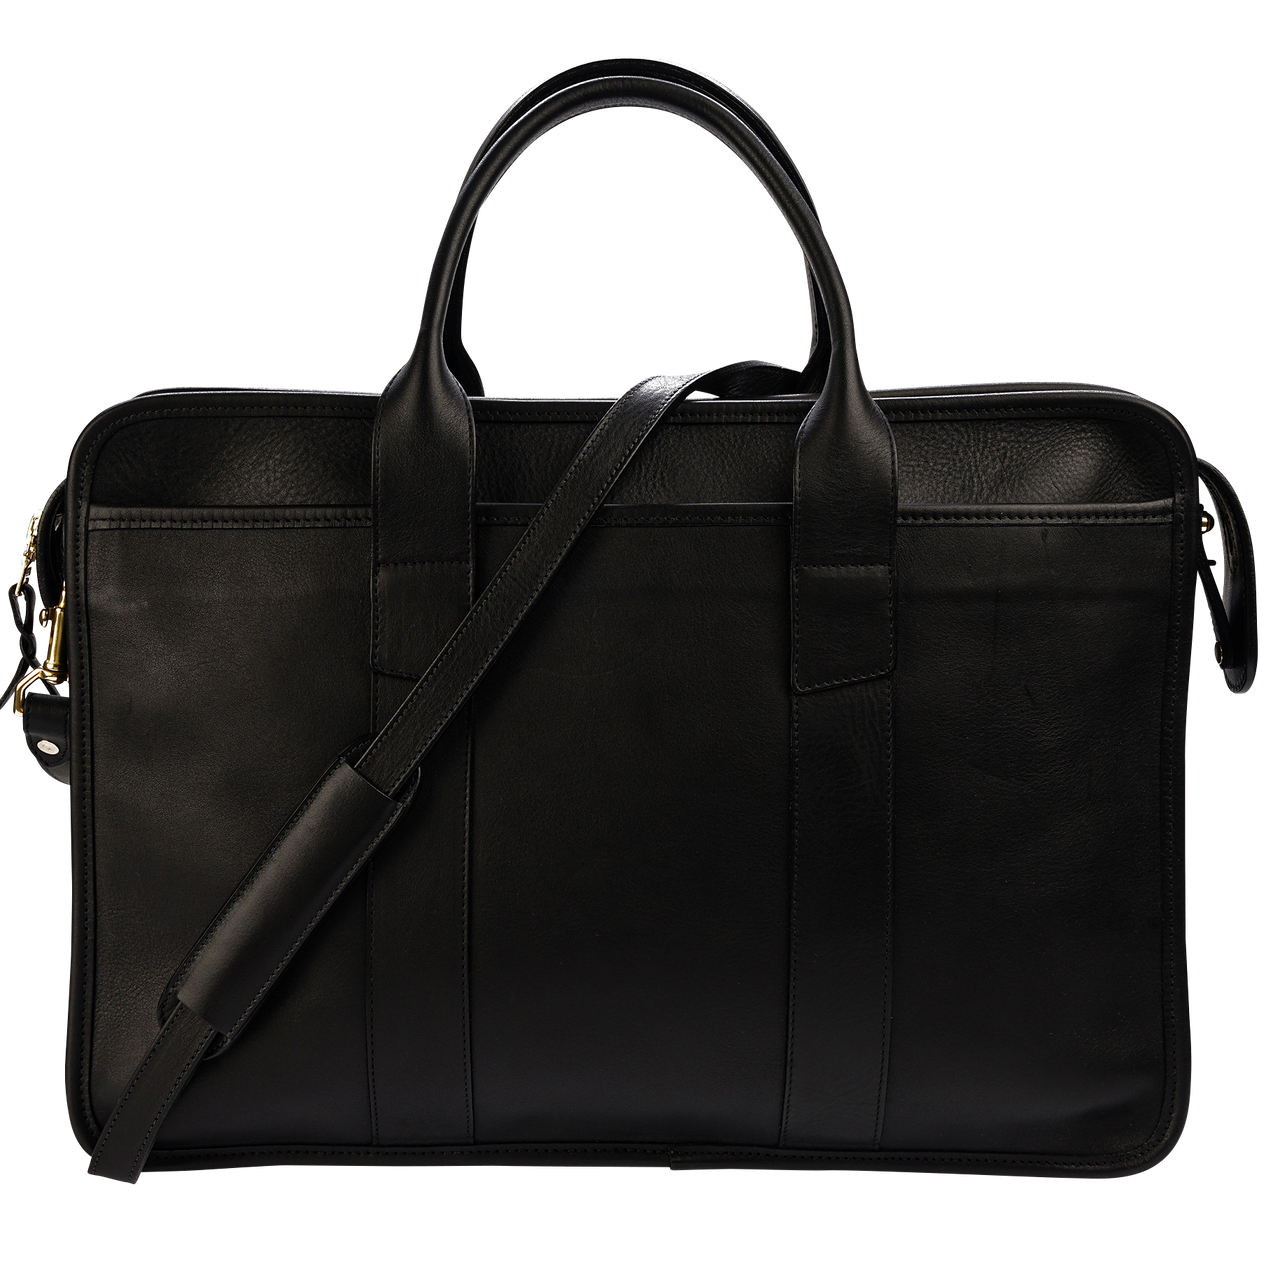 Frank Clegg x WJ & Co. Bound Edge Zip-Top Briefcase in Black Tumbled Leather